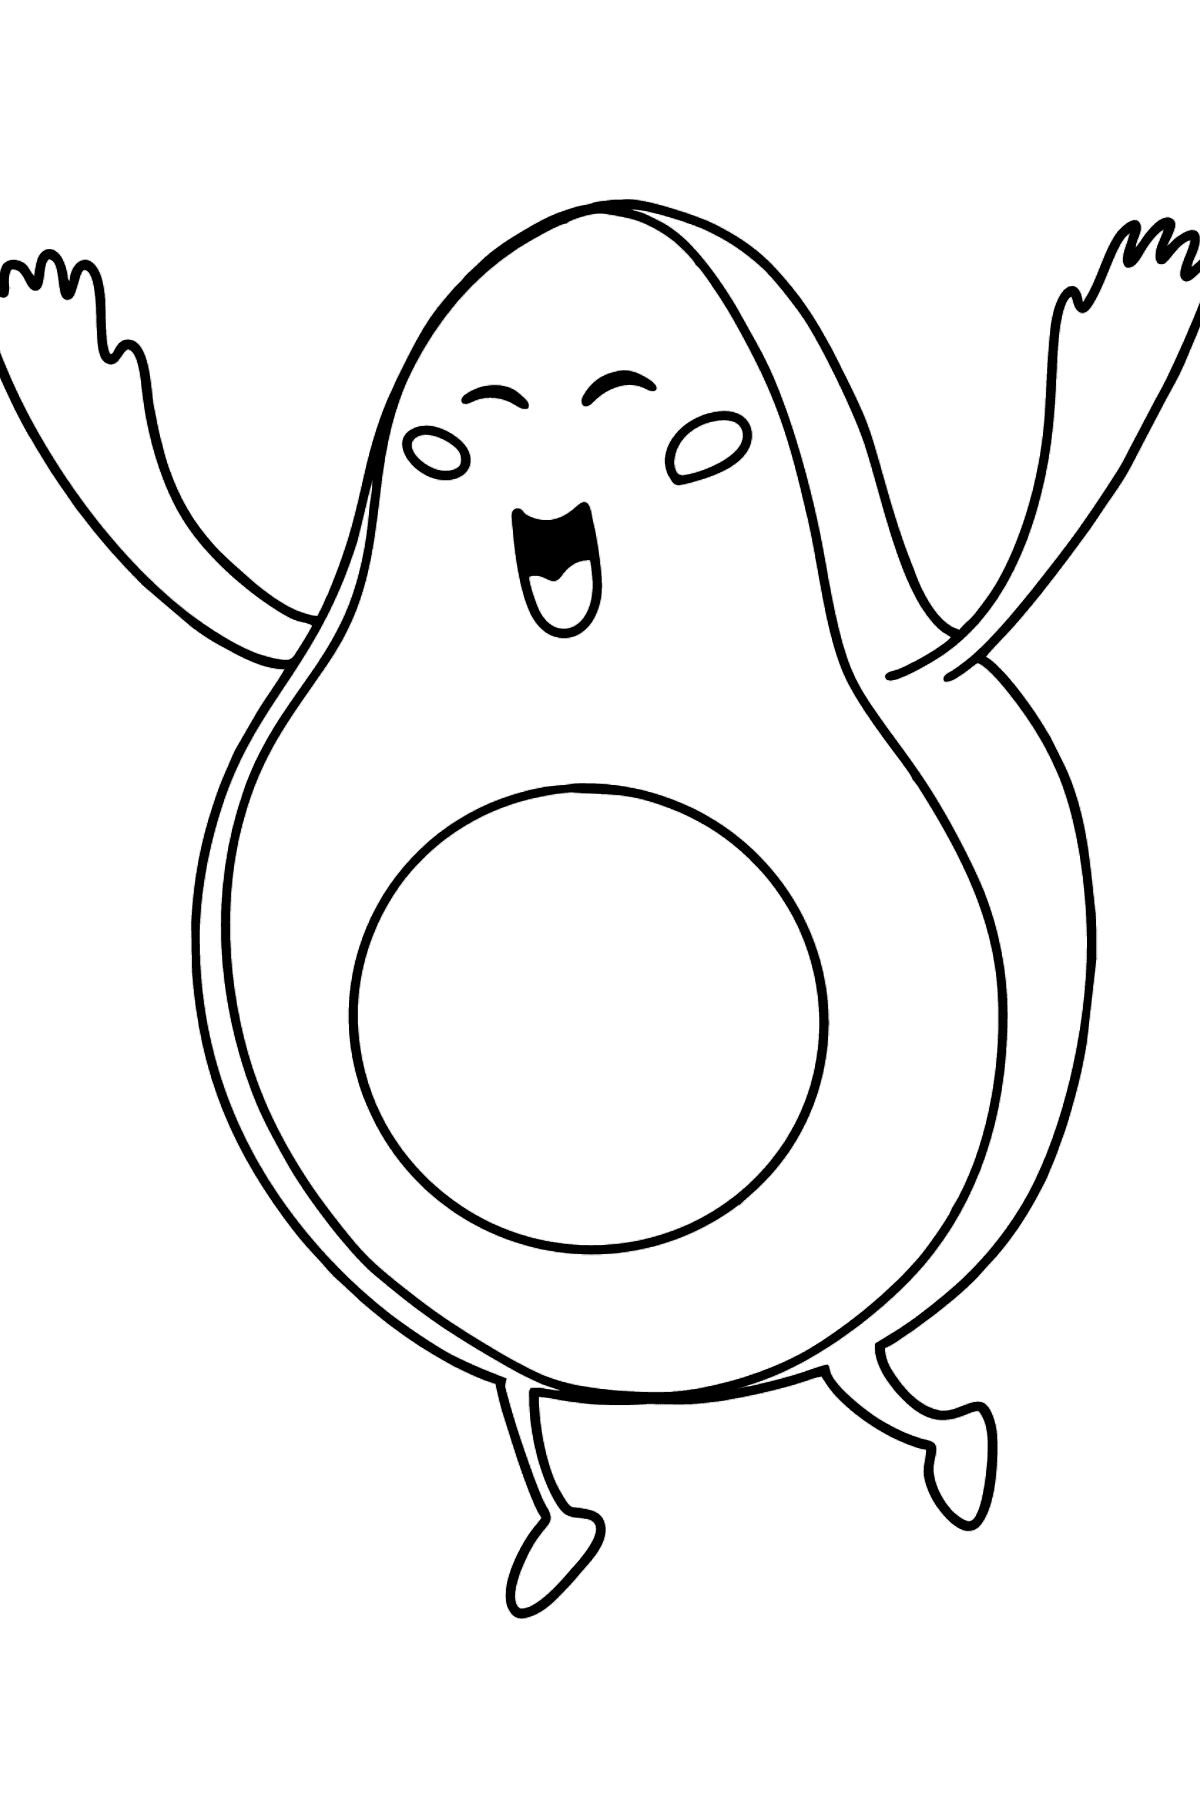 Avocado Hug coloring page - Coloring Pages for Kids